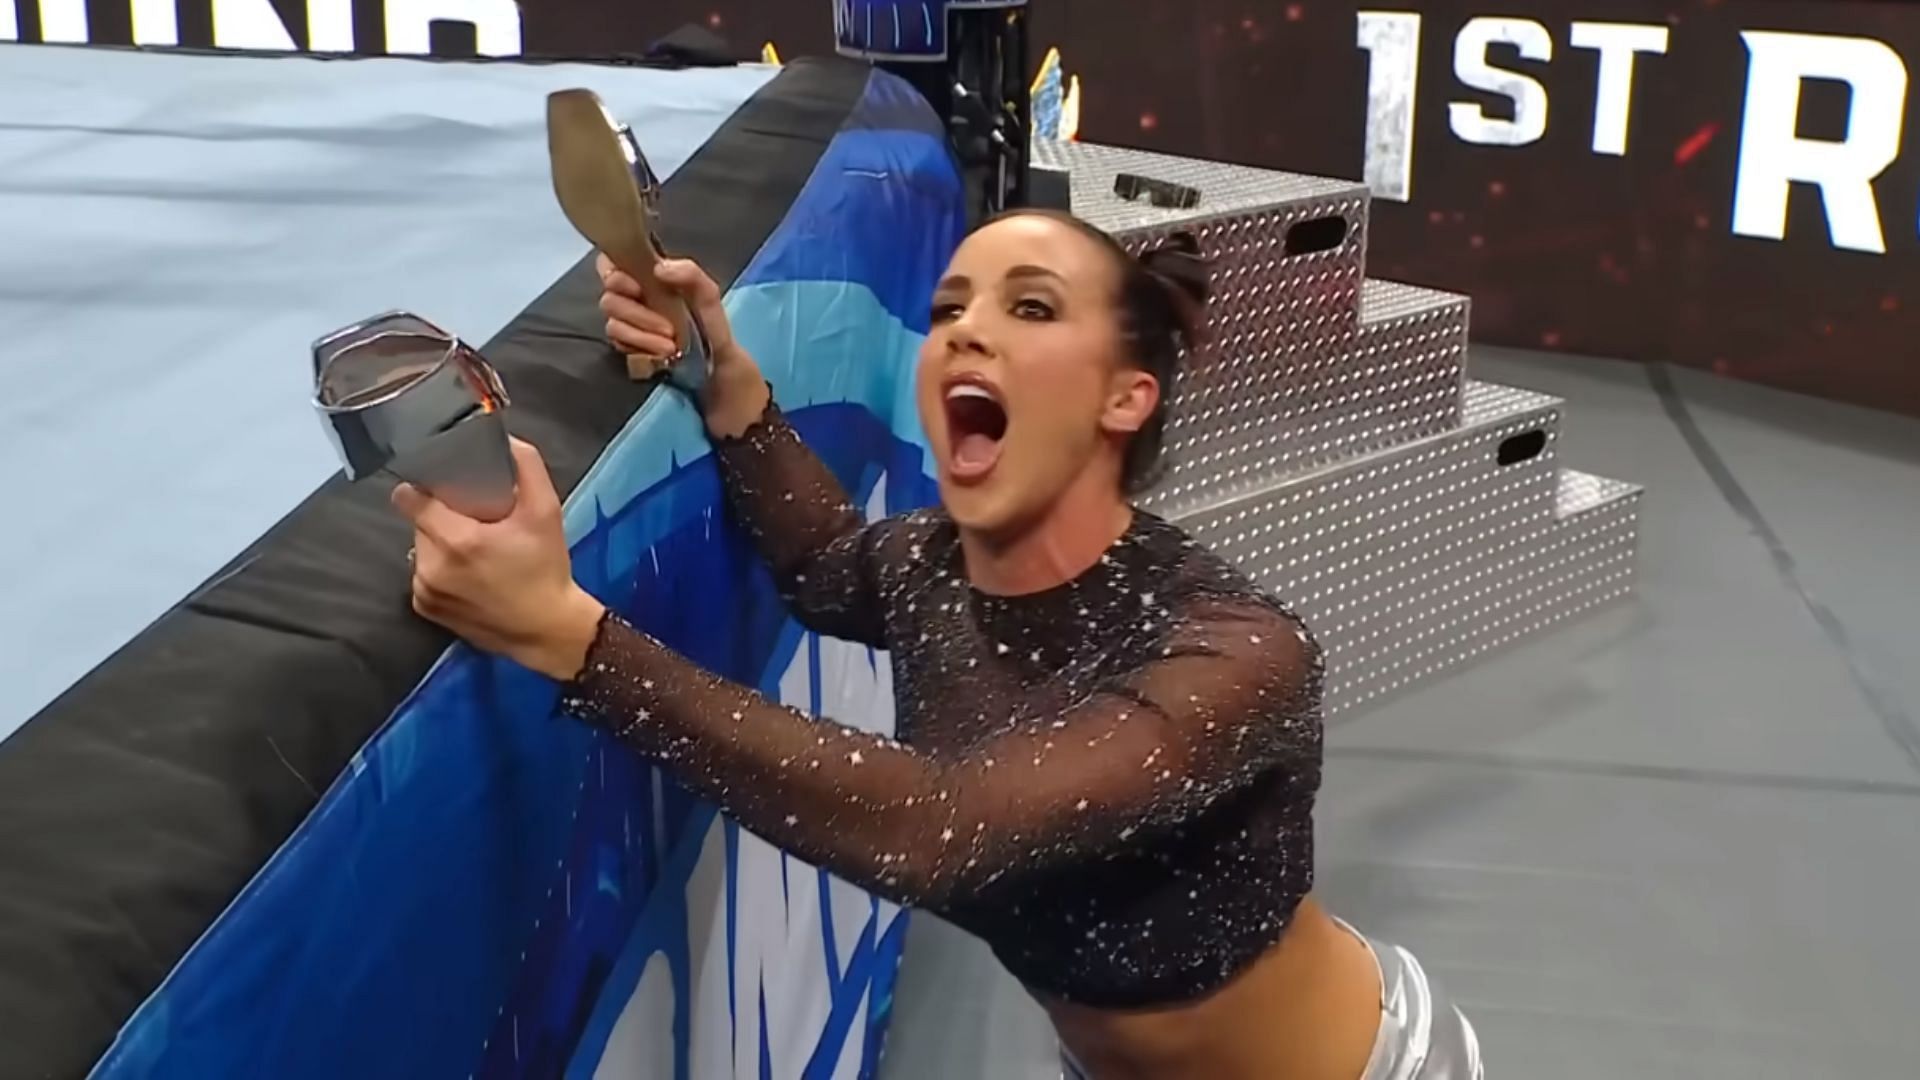 Chelsea Green was up to her usual tricks on SmackDown.